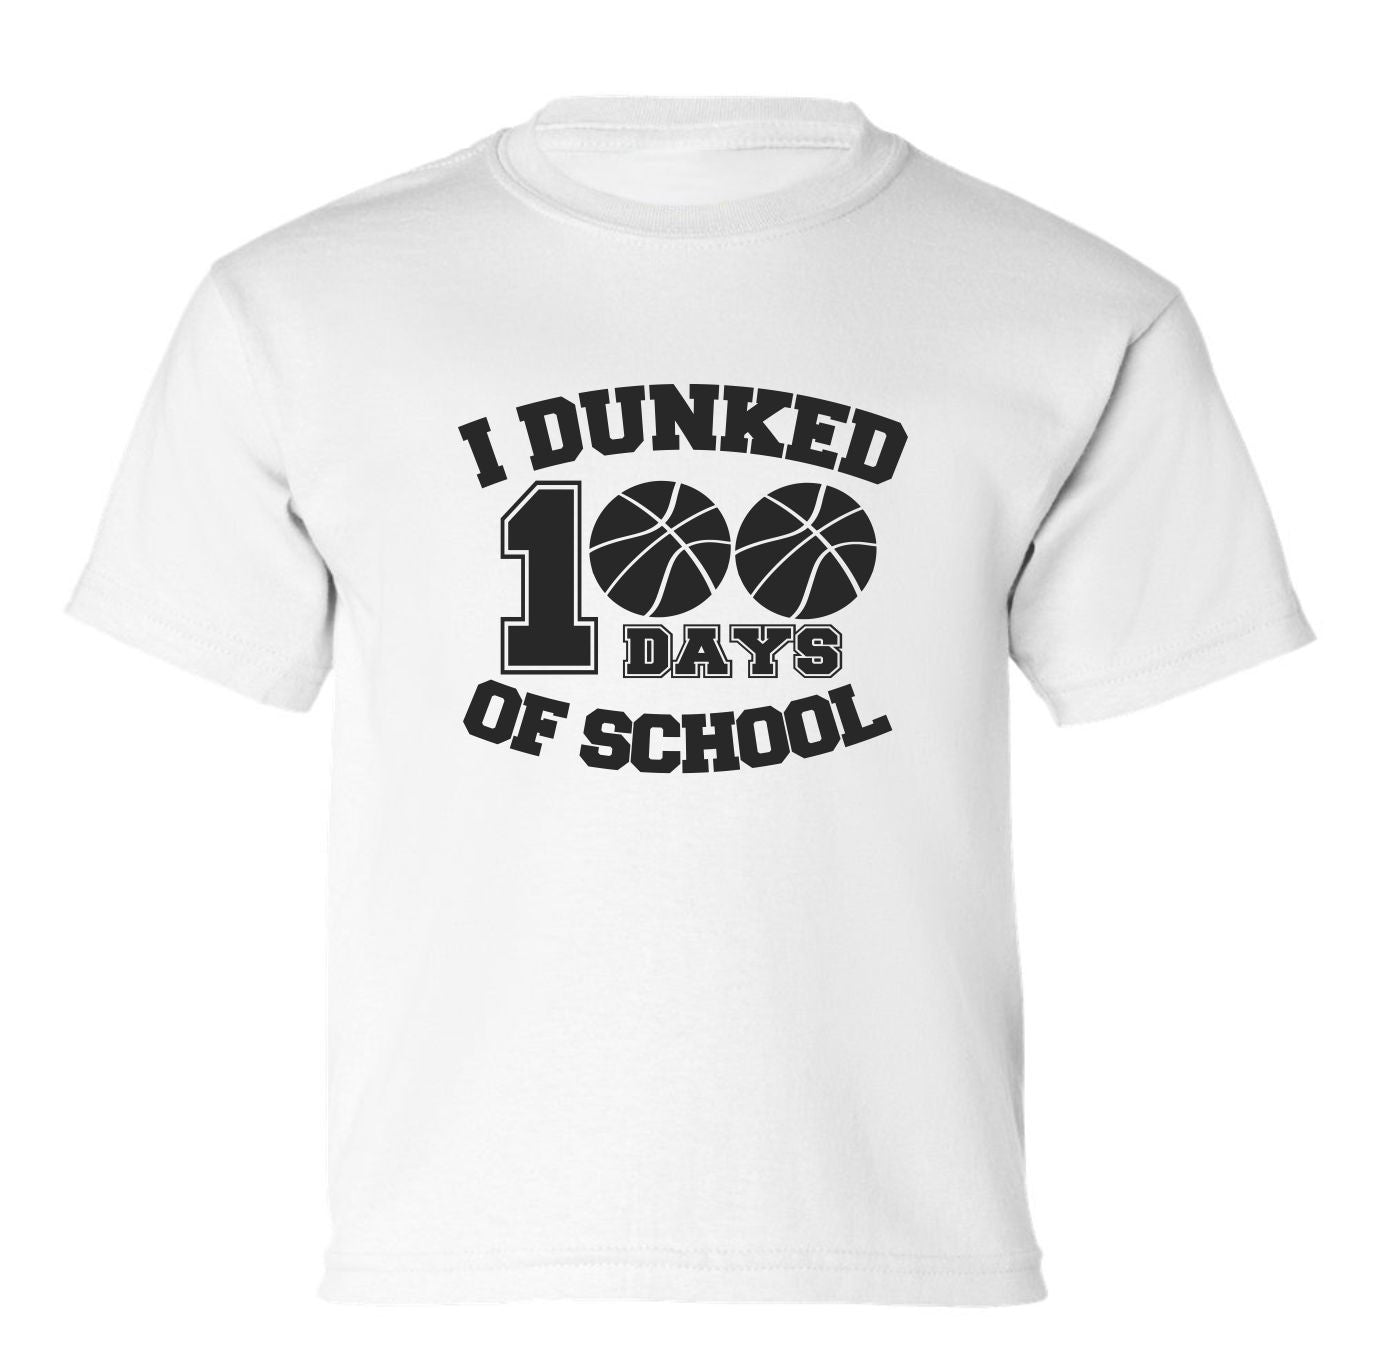 "I Dunked 100 Days Of School" Toddler/Youth T-Shirt